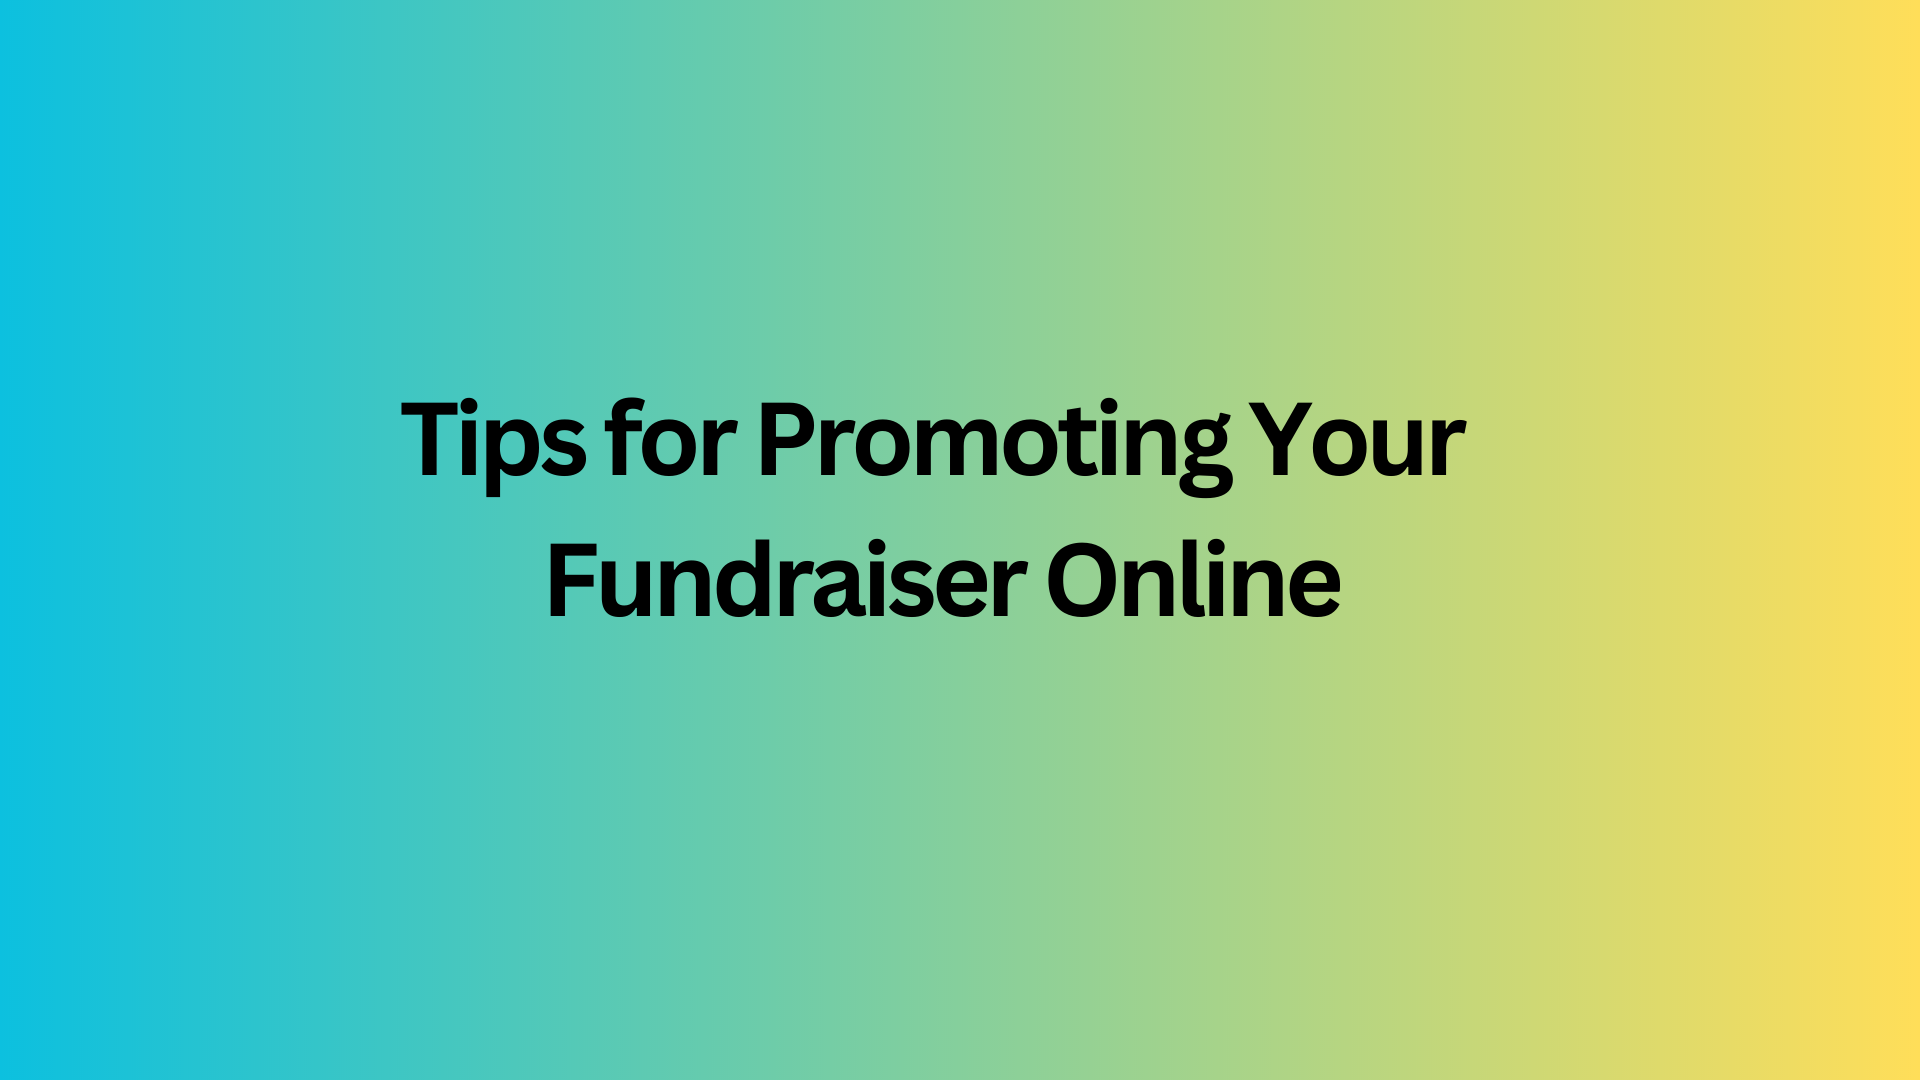 Tips for Promoting Your Fundraiser Online